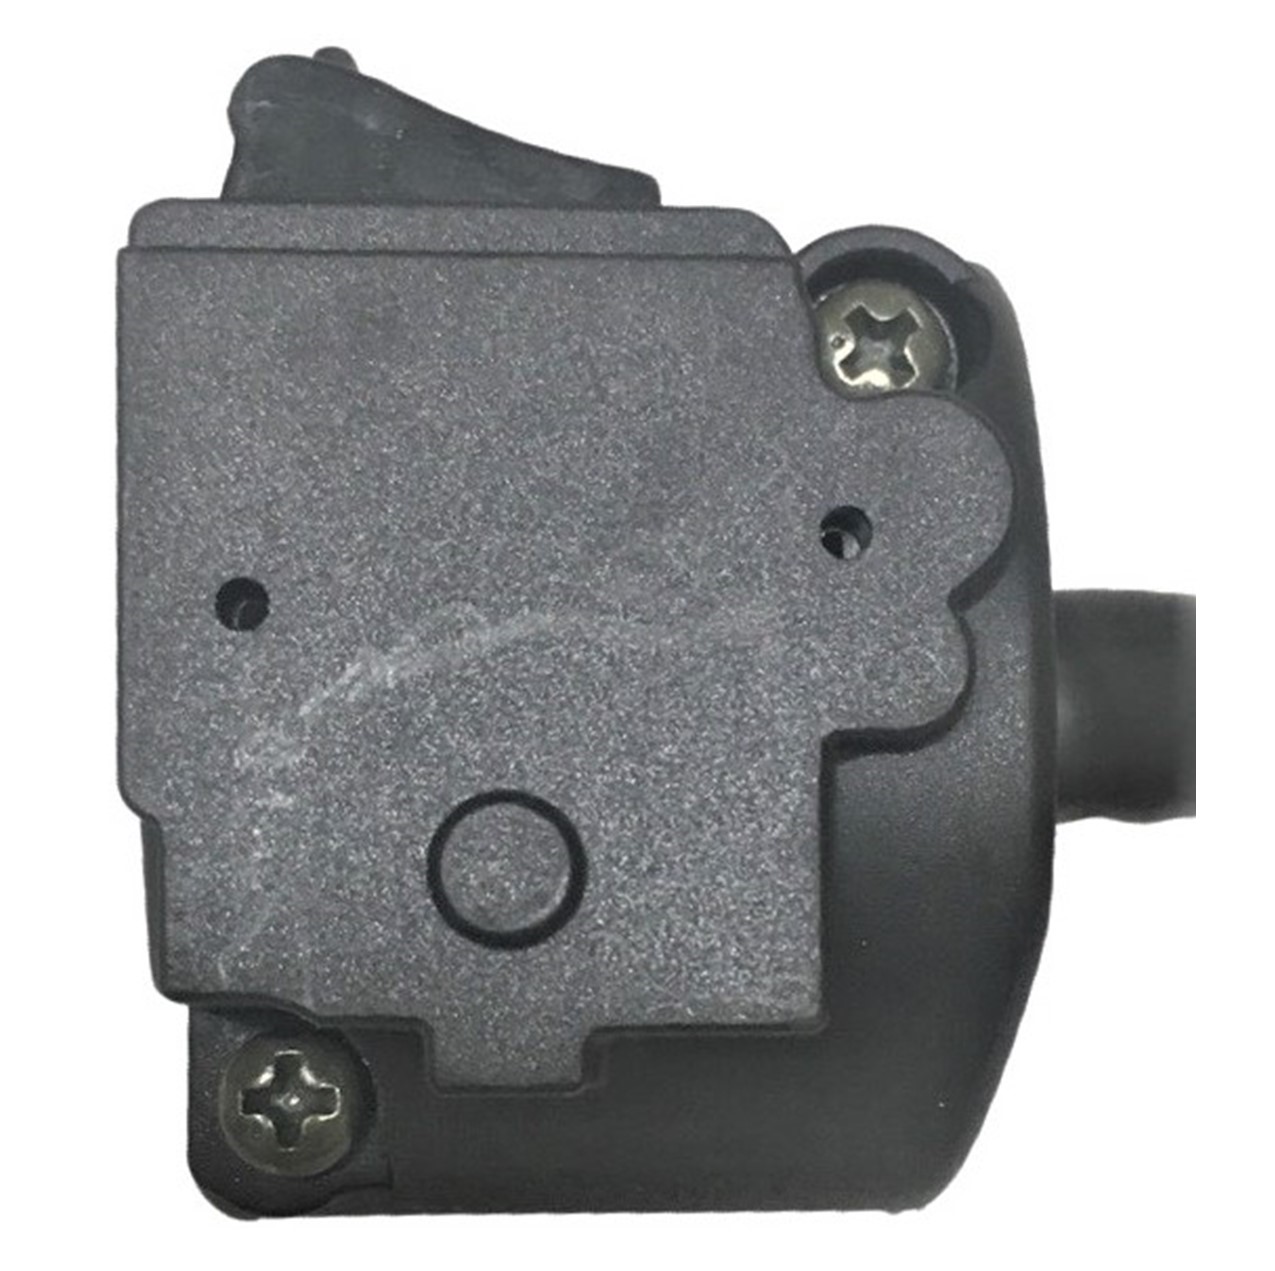 Handlebar Switch (Left Hand) 6 Pins in 6 Pin Male Jack Fits many TaoTao ATVs & Coleman ATVs models + others - Click Image to Close